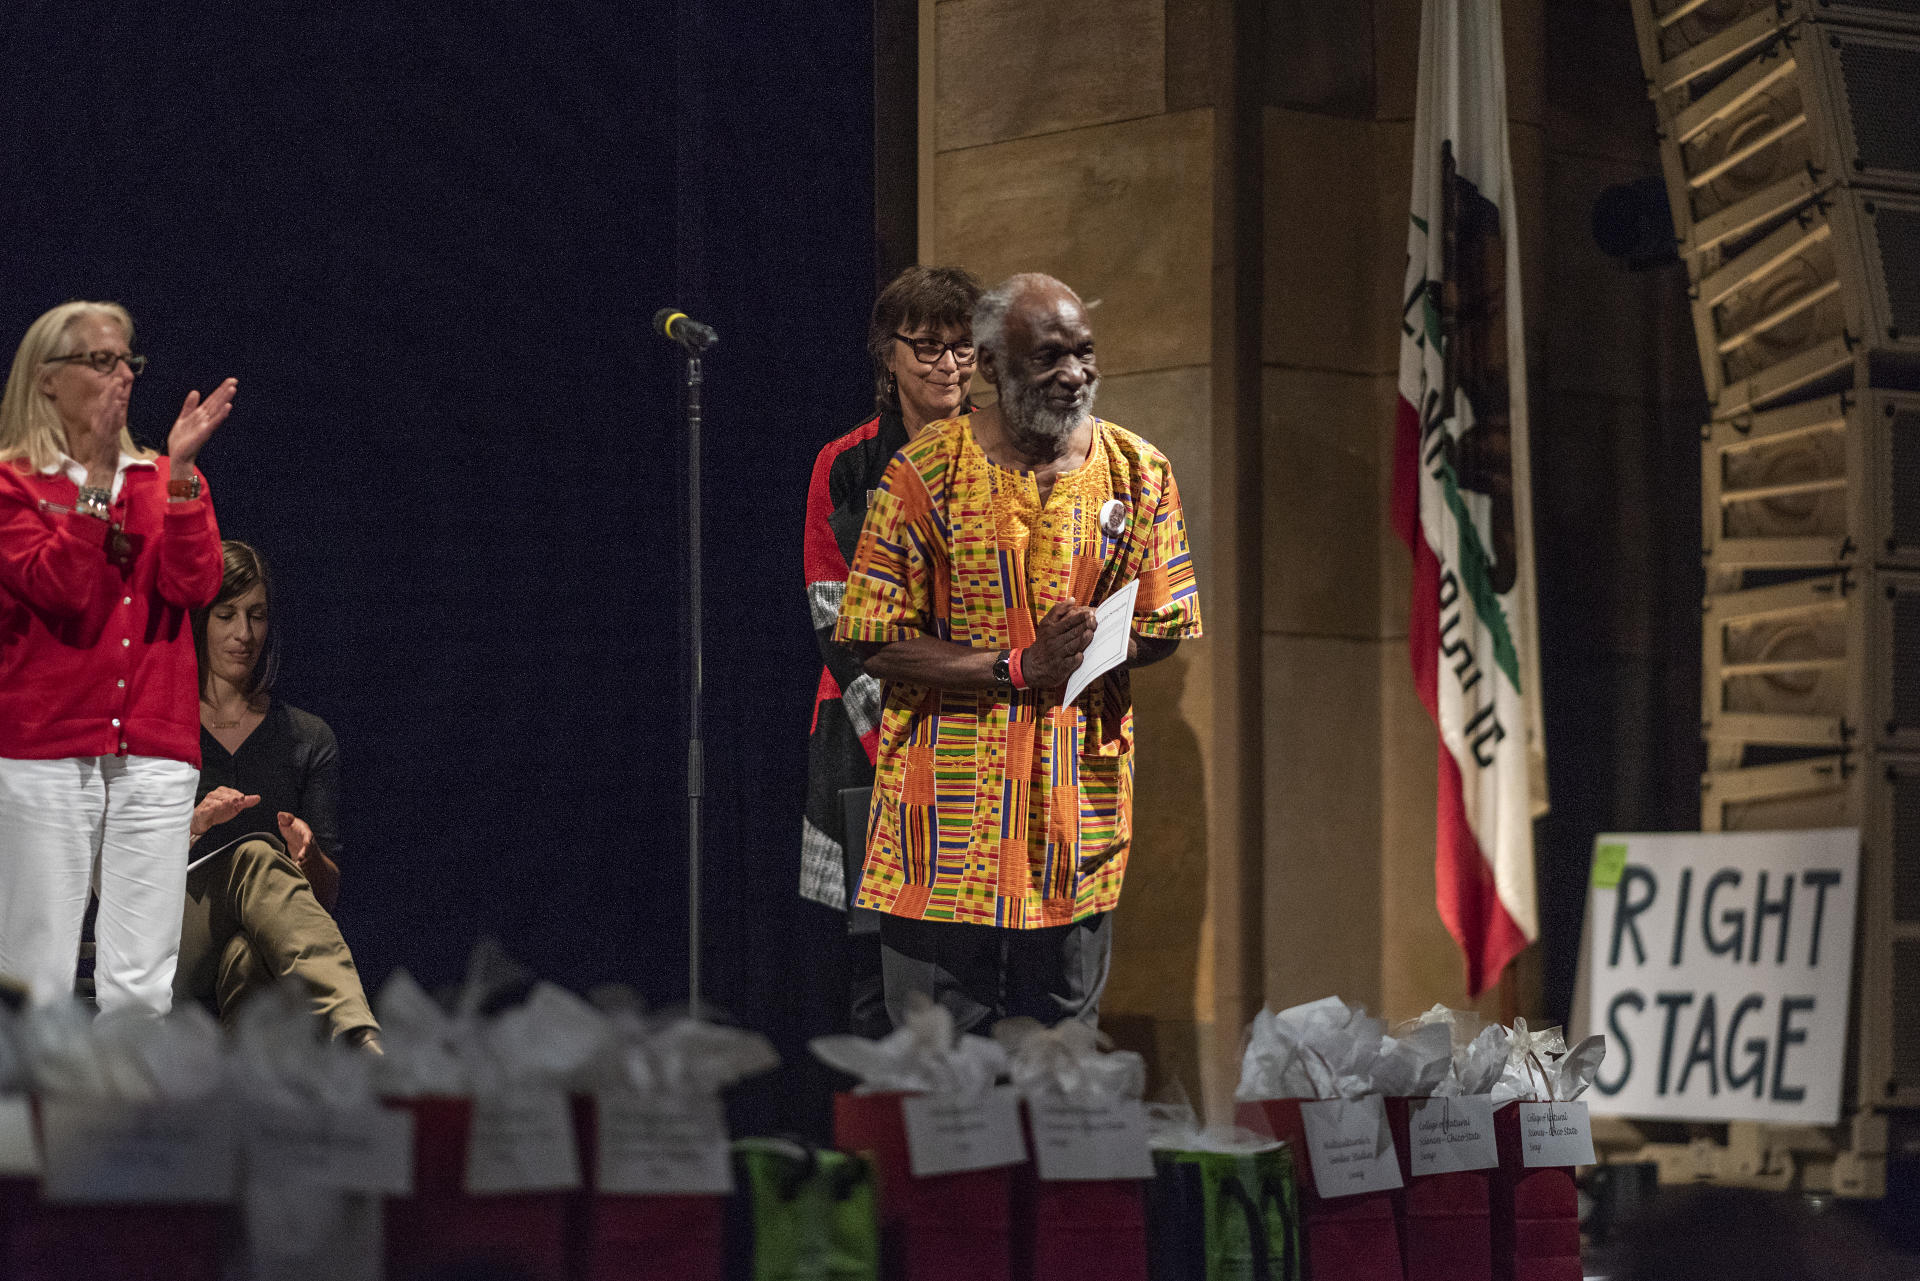 President Gayle Hutchinson and other staff members on a stage applaud James Luyirika-Sewagudd, who gestures toward the audience graciously while receiving an award.